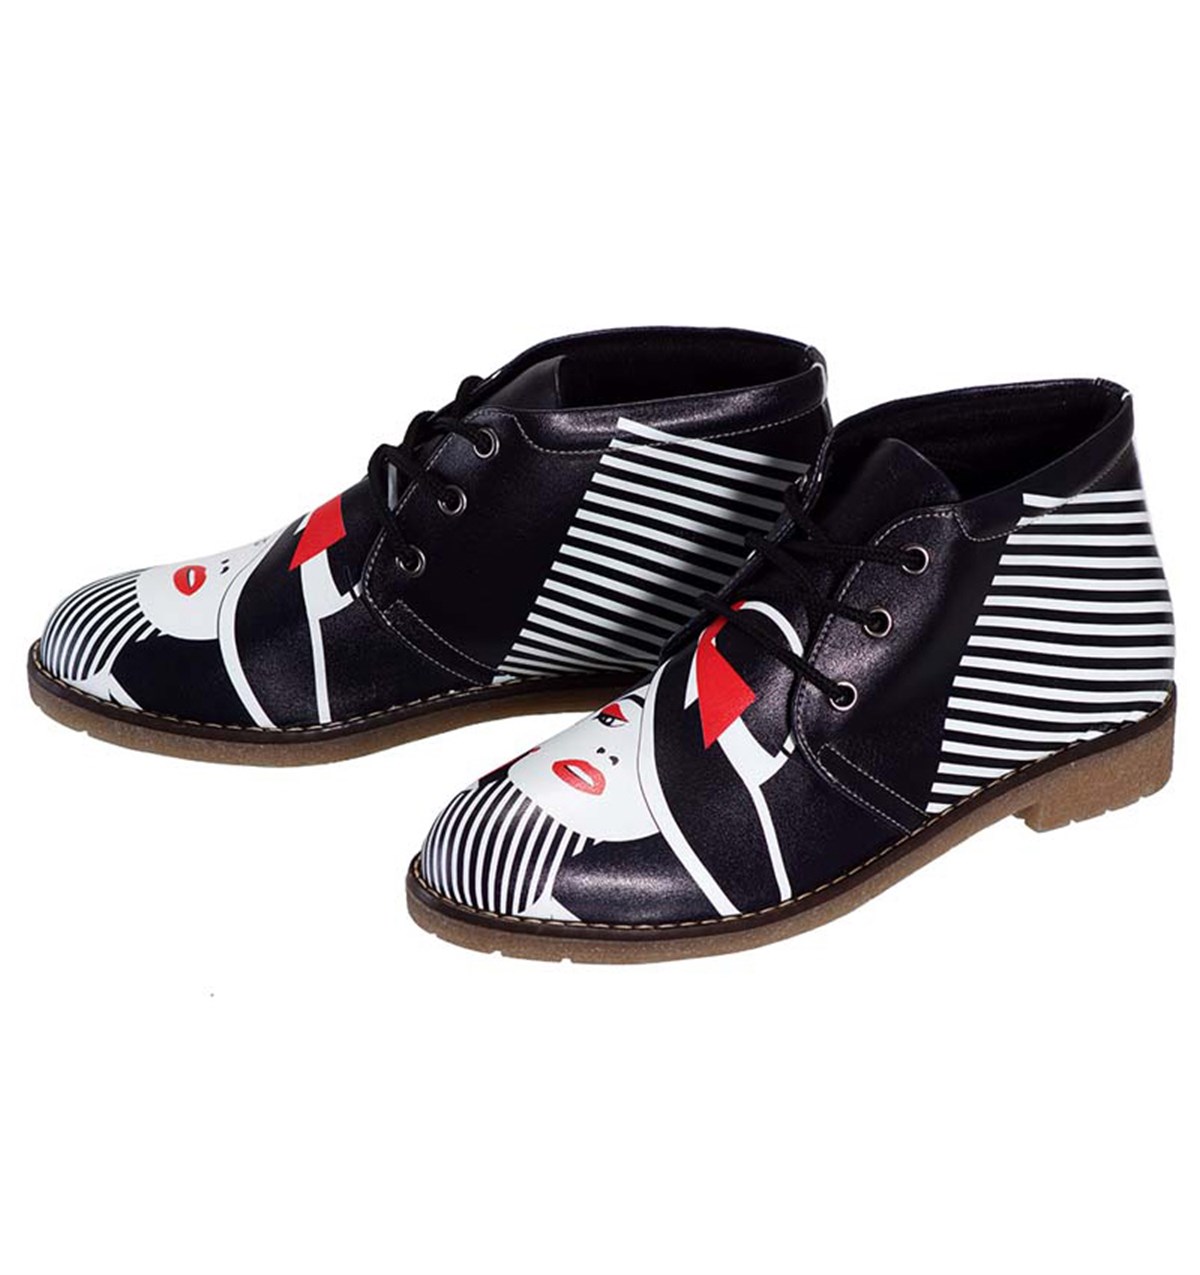 Printed Black and White Patterned Women's Poppy Boots